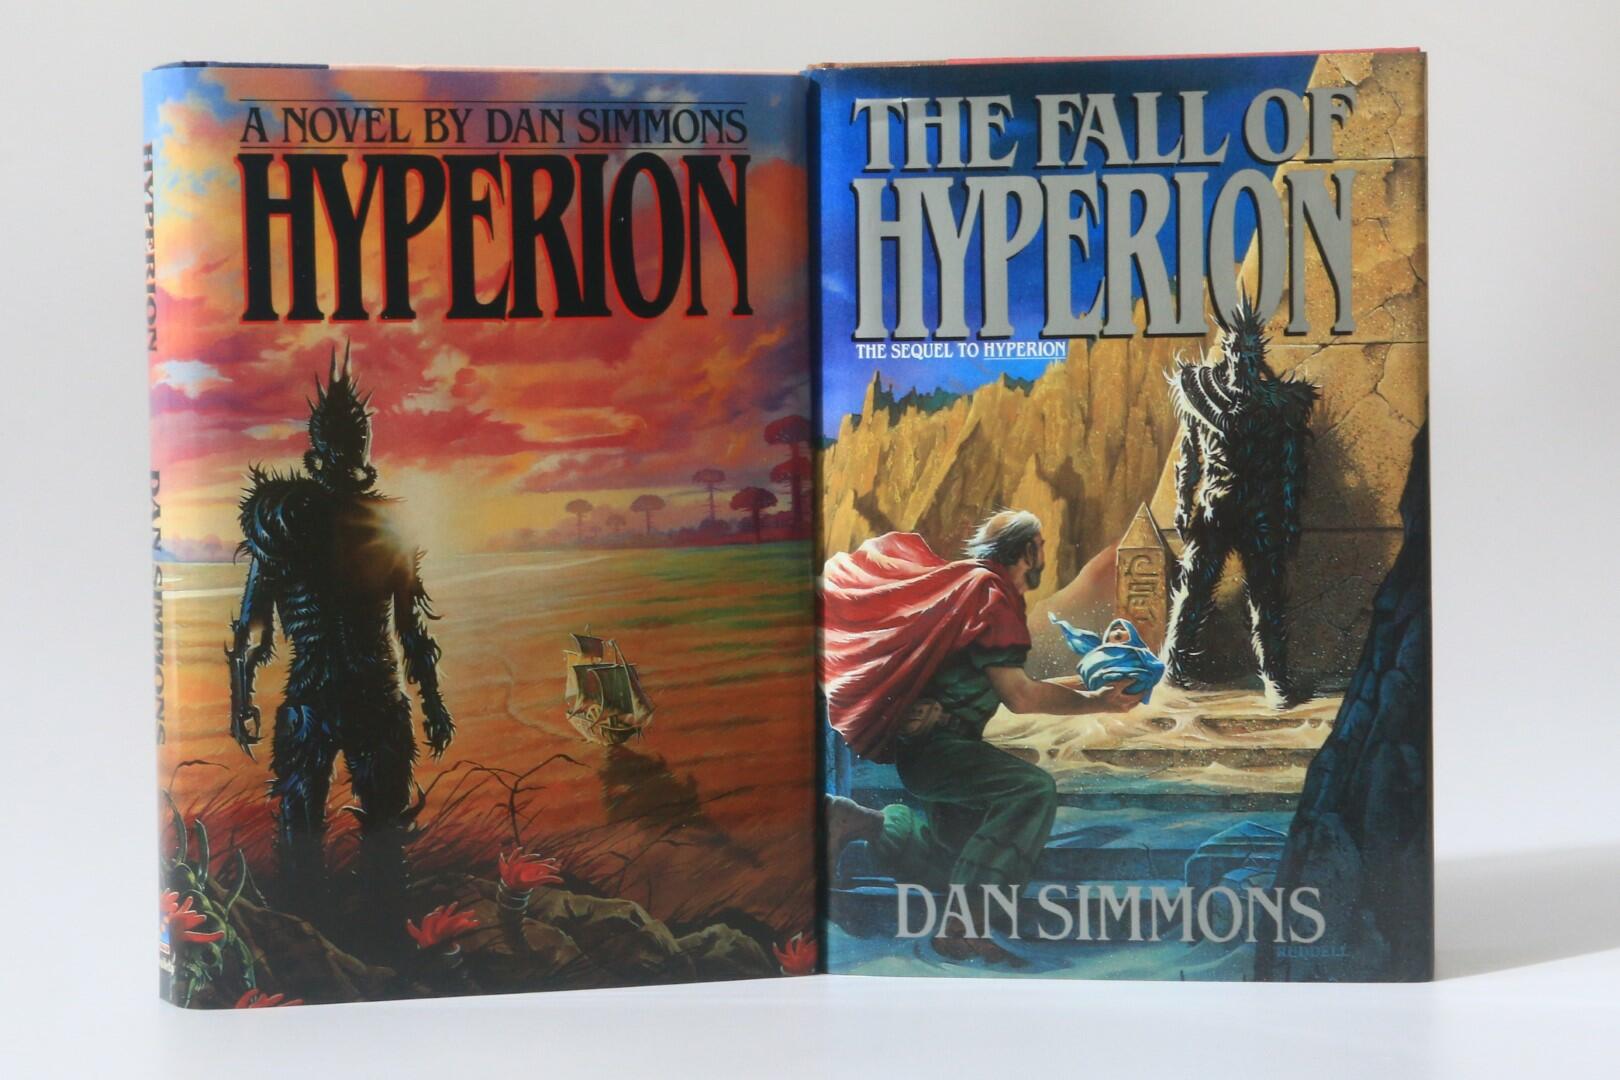 Dan Simmons - Hyperion w/ The Fall of Hyperion - Doubleday, 1989, First Edition.